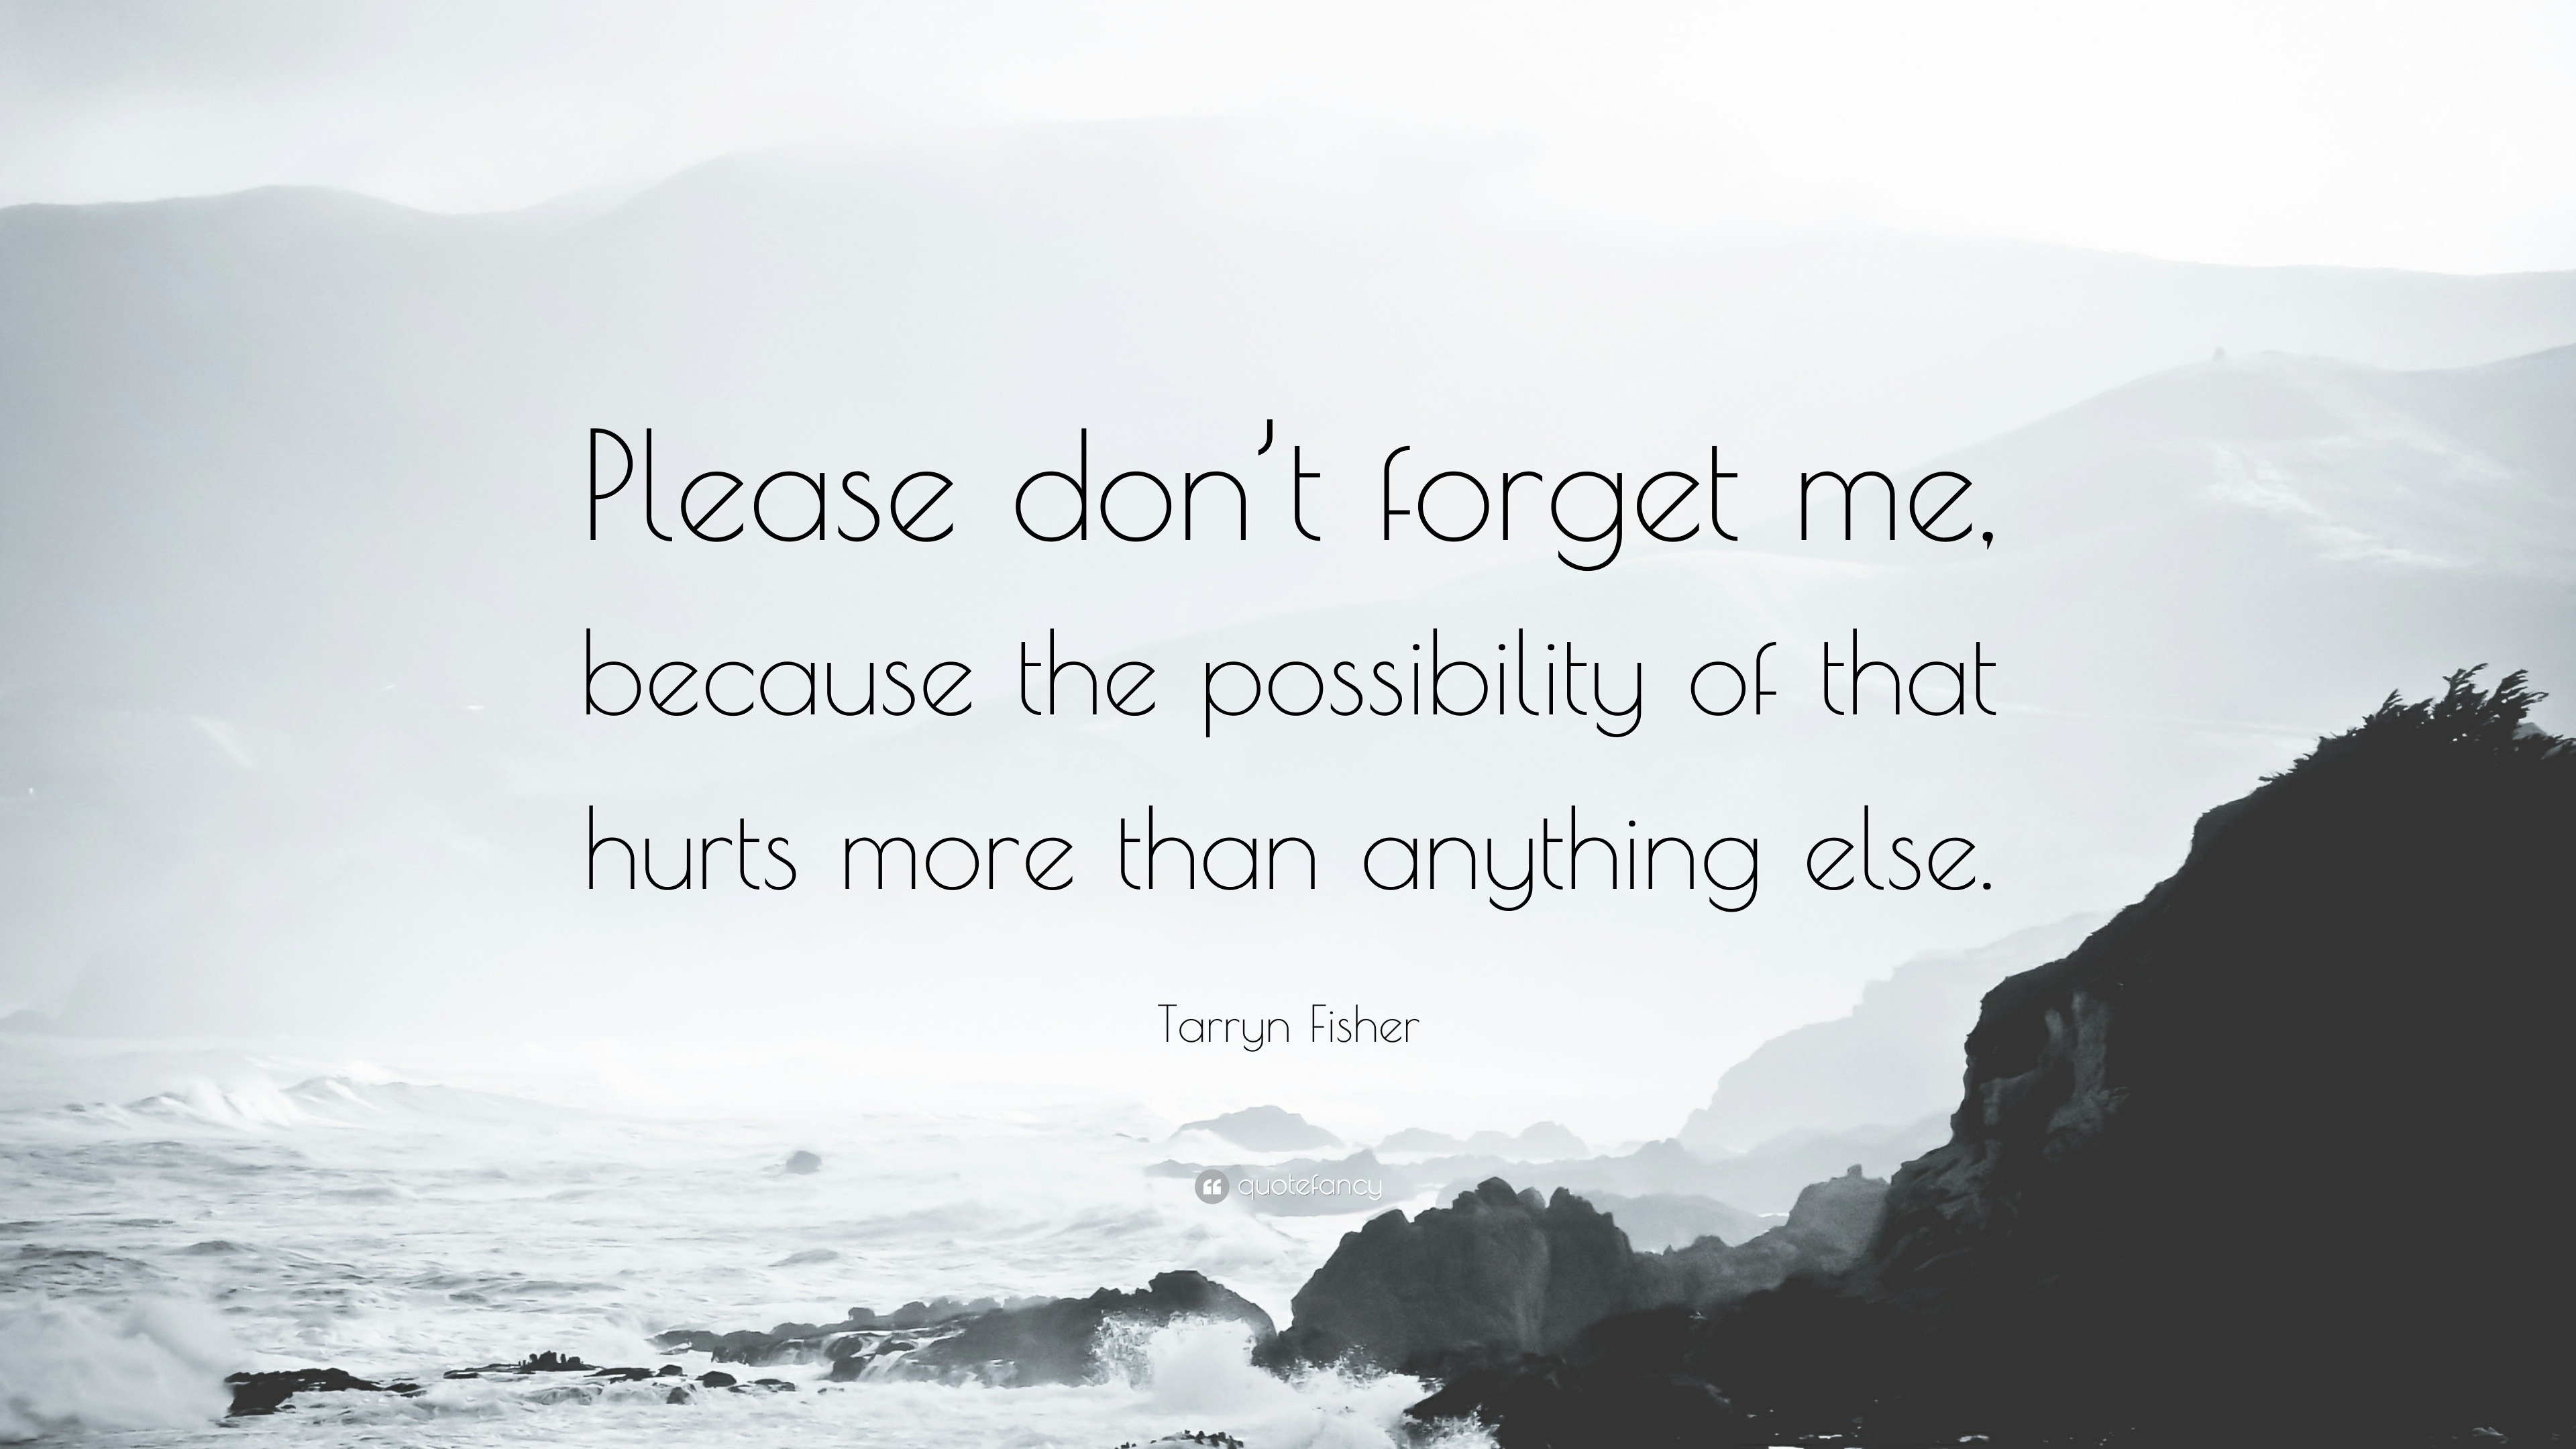 Tarryn Fisher Quote: “Please Don't Forget Me, Because The Possibility Of That Hurts More Than